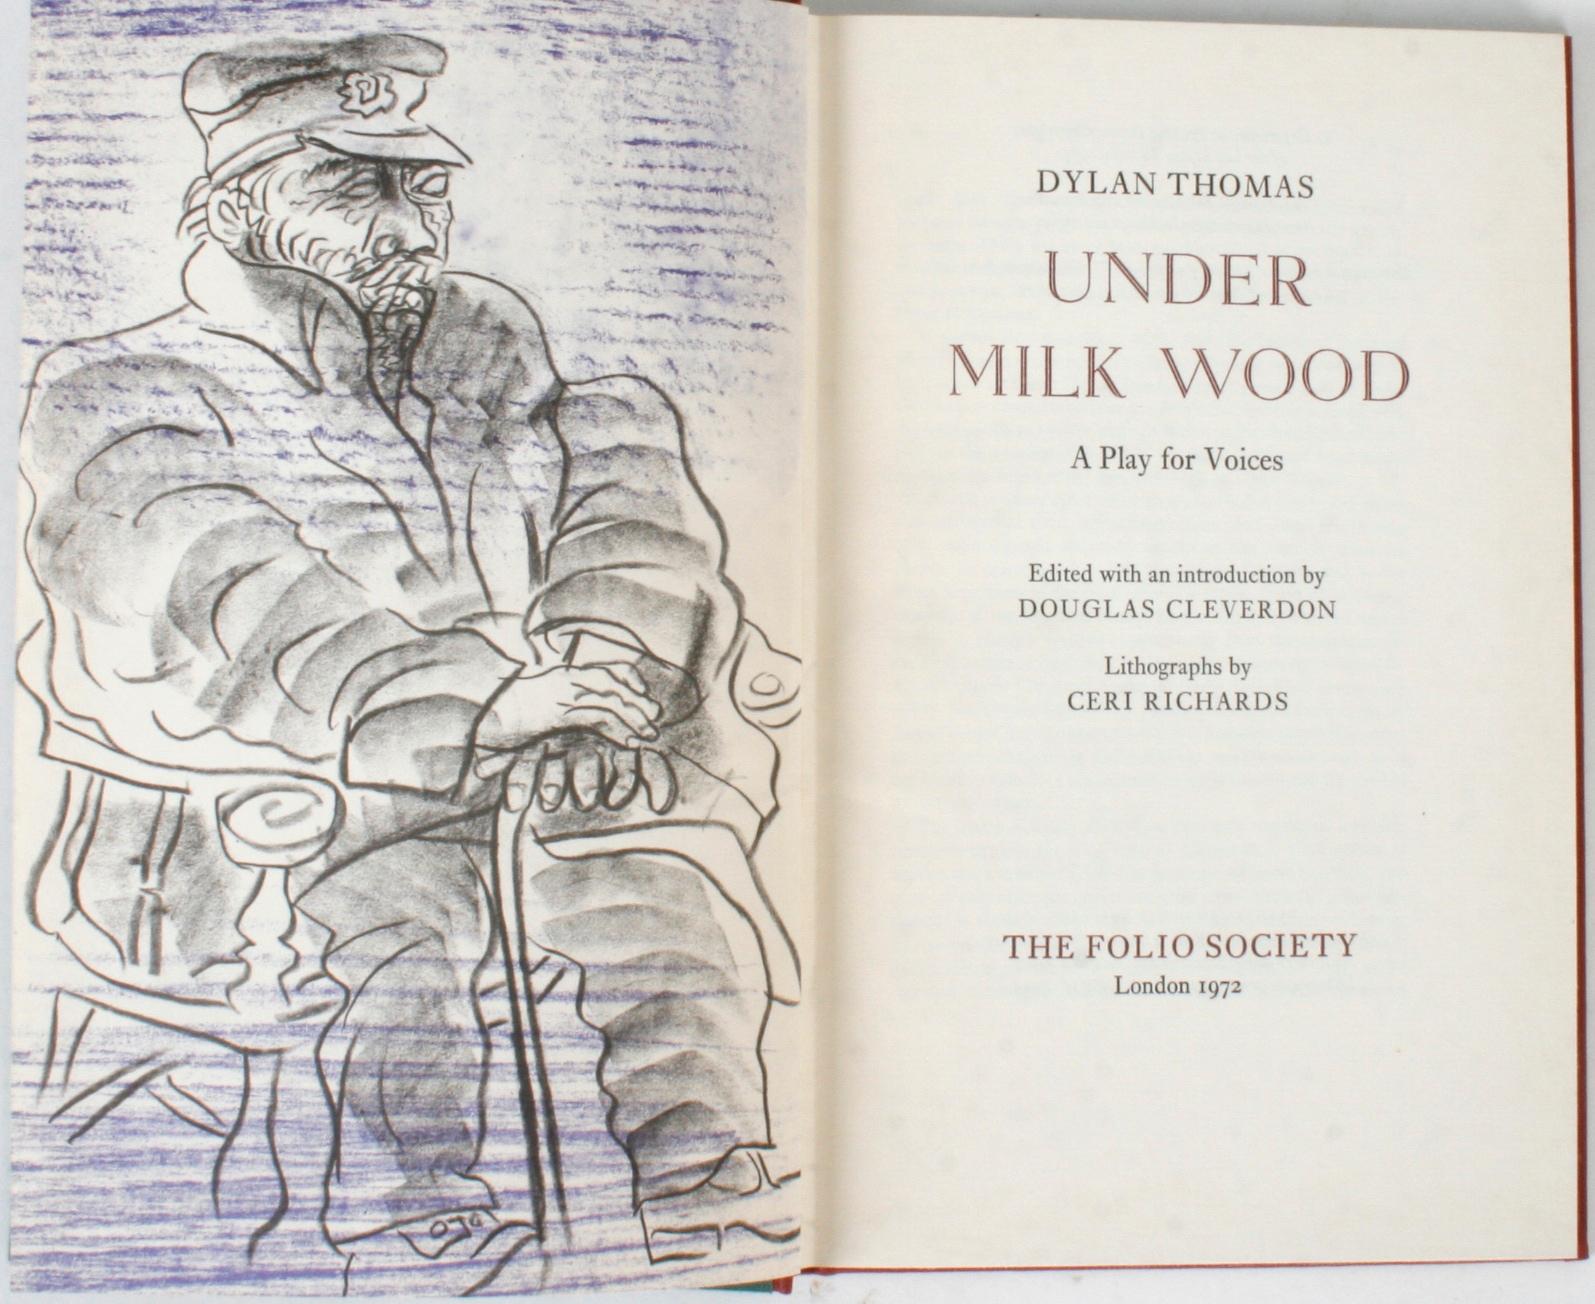 Under milk wood, A Play of Voices by Dylan Thomas. London: The Folio Society, 1972. Hardcover with original slip case. 93 pp. Based on Dylan's final BBC script with 9 lithographic line drawings by Ceri Richards and an introduction by Douglas